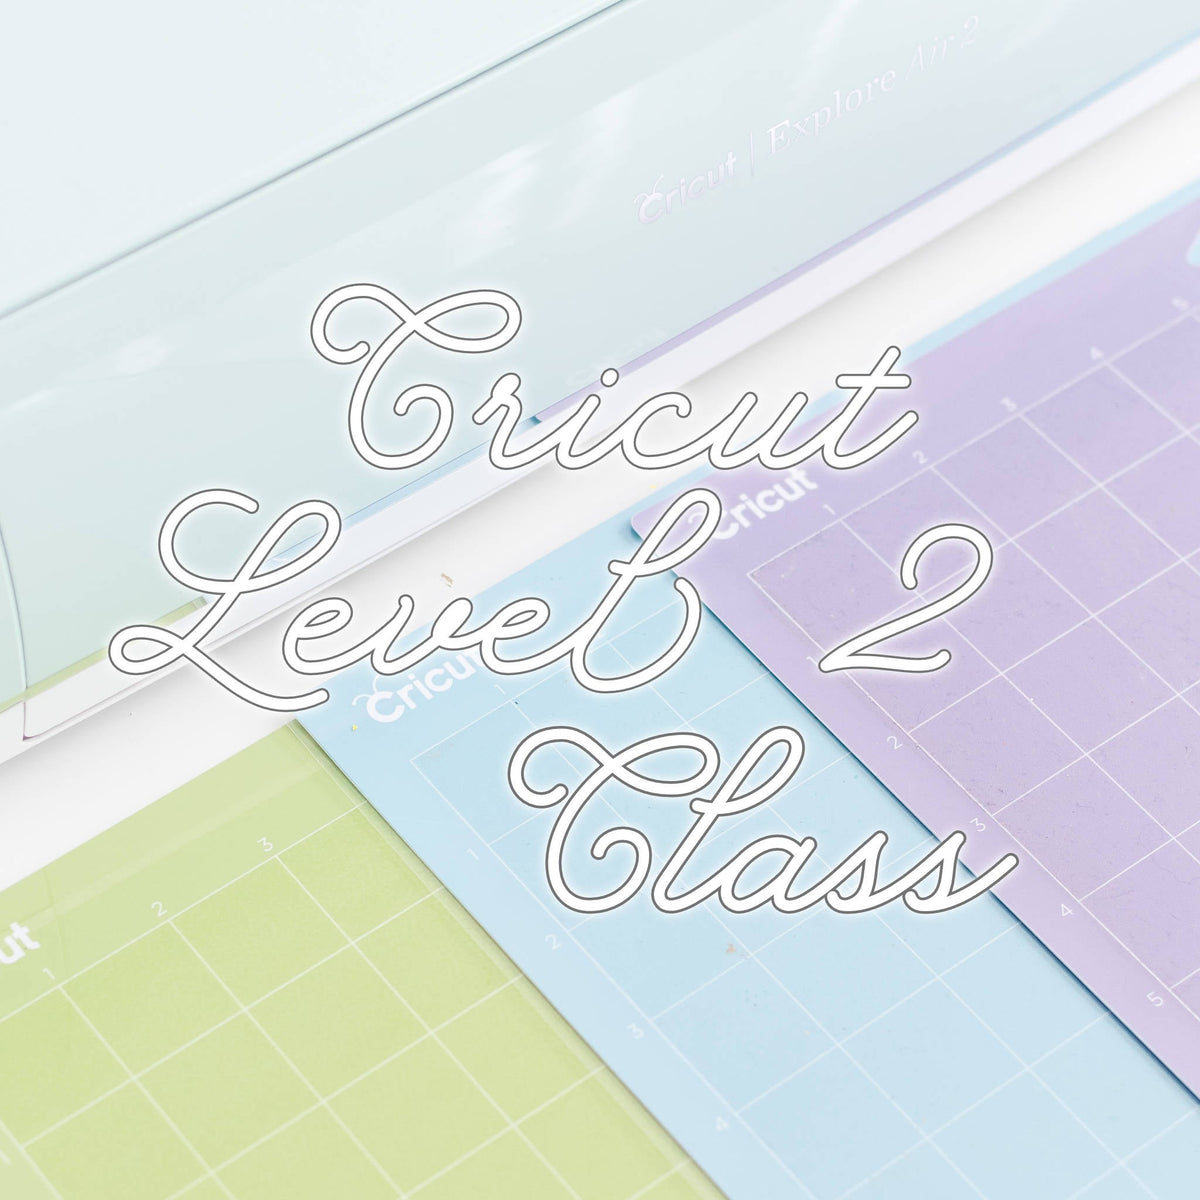 Cricut One Day Level II Workshop- Sunday August 20 from 9 am to 4 pm